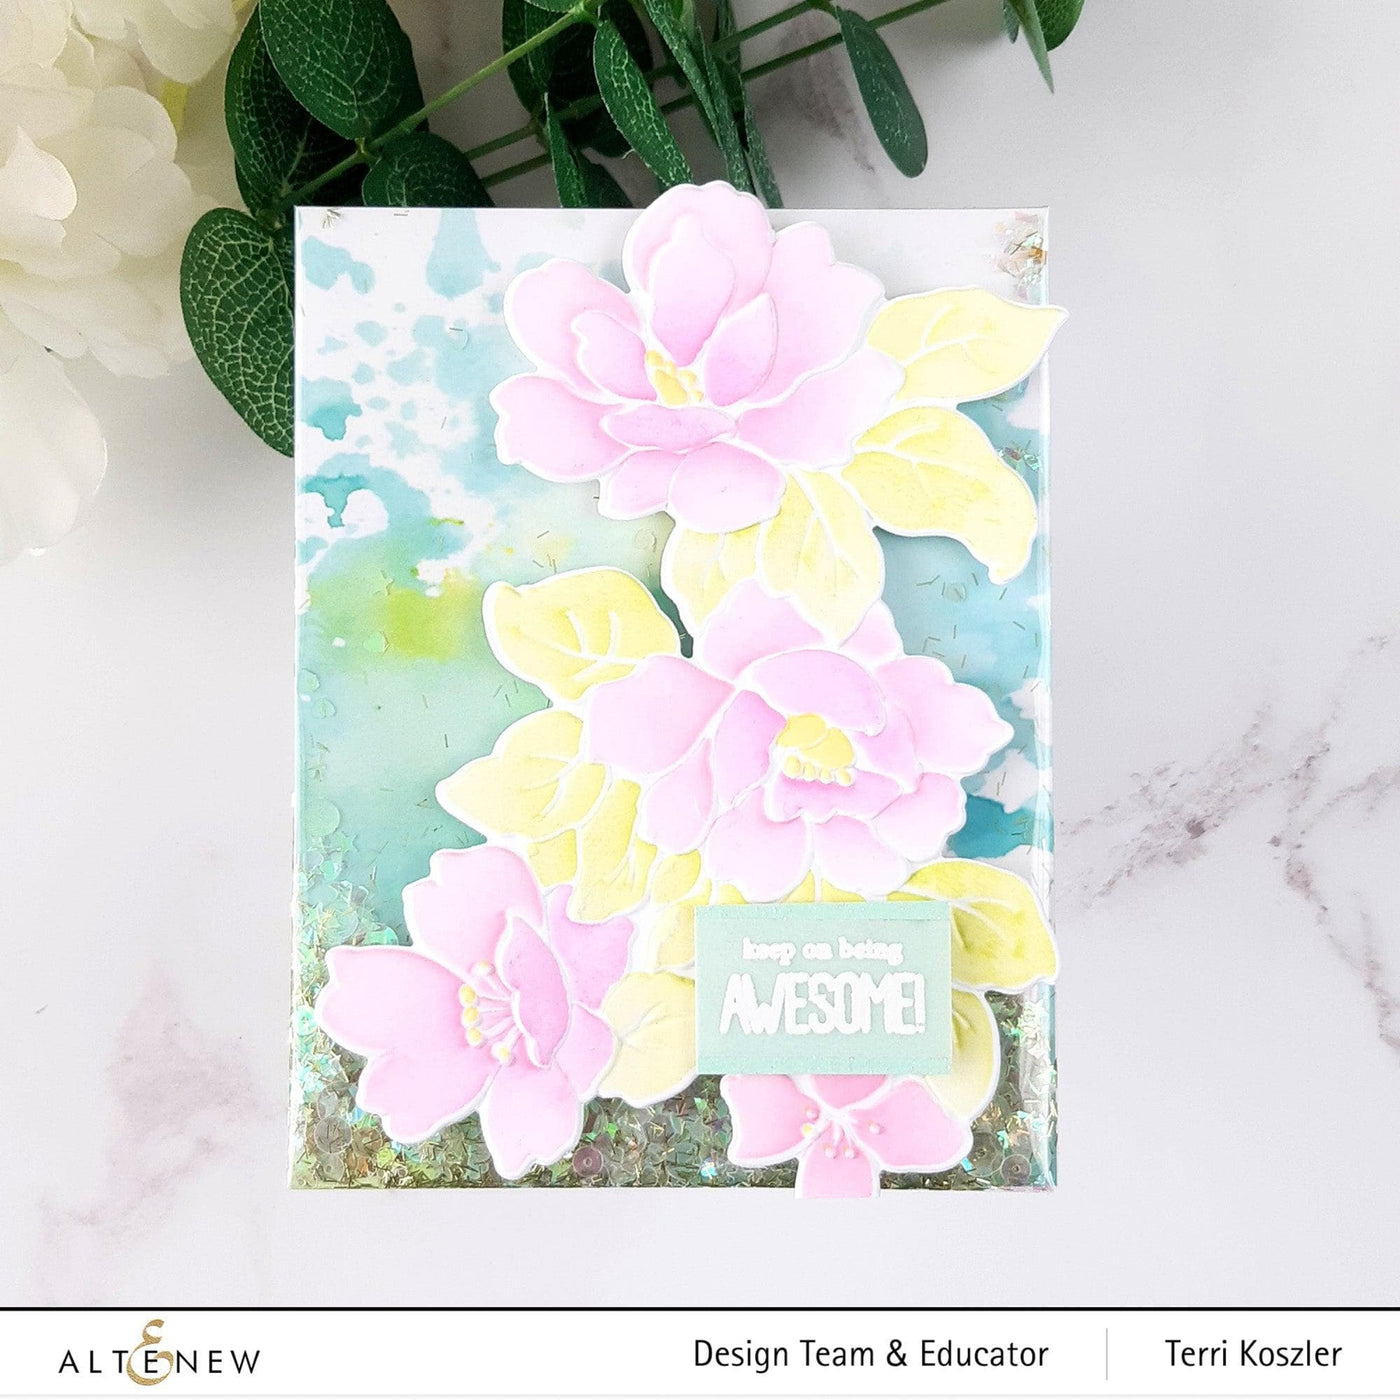 Craft Your Life Project Kit: Sweet Buttercups